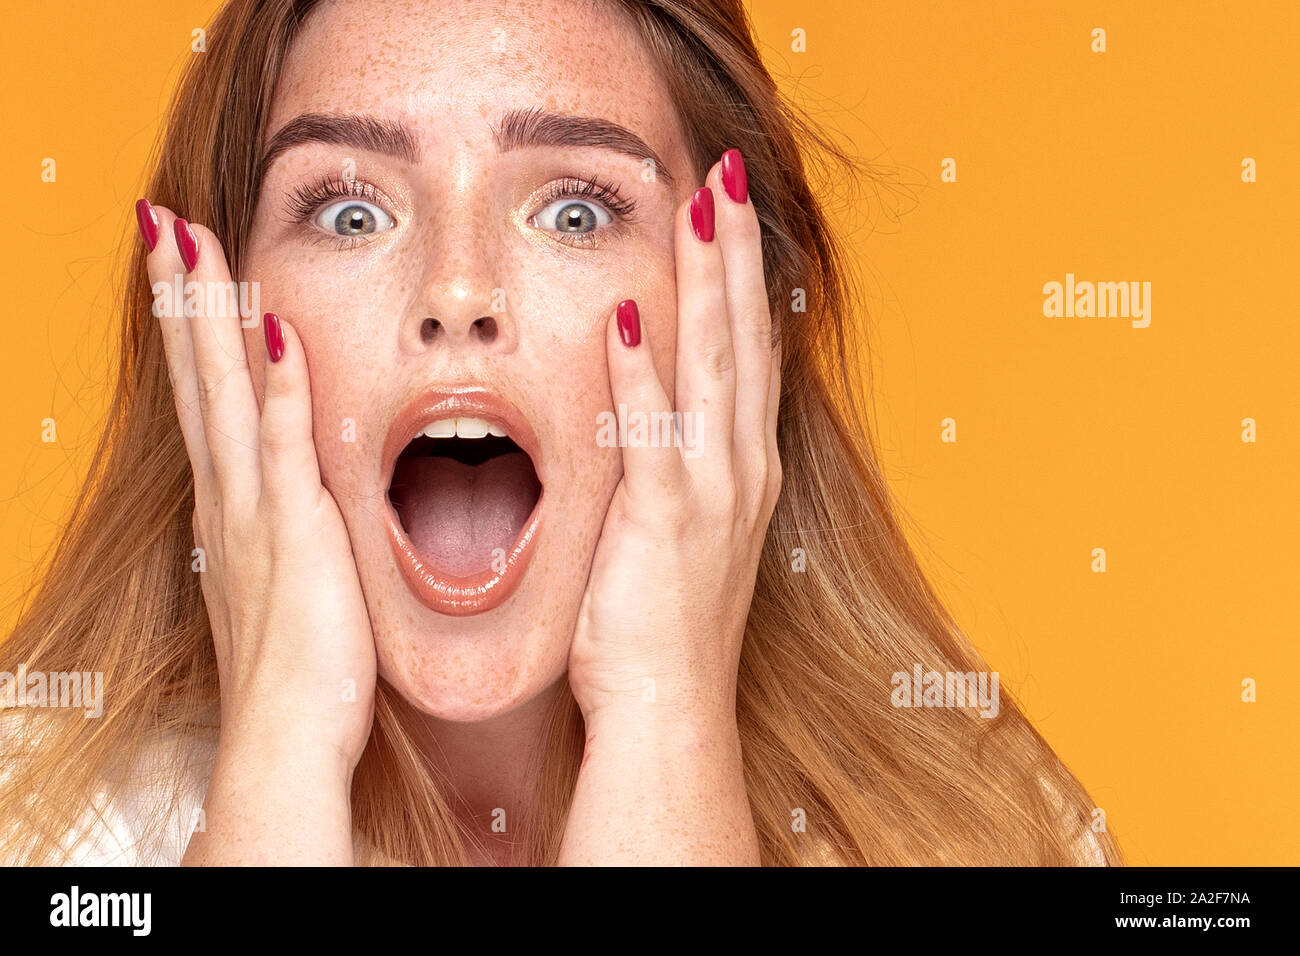 Emotional happy young ginger woman with freckles on her face . Human expression, emotions concept. Yellow color studio background. Stock Photo